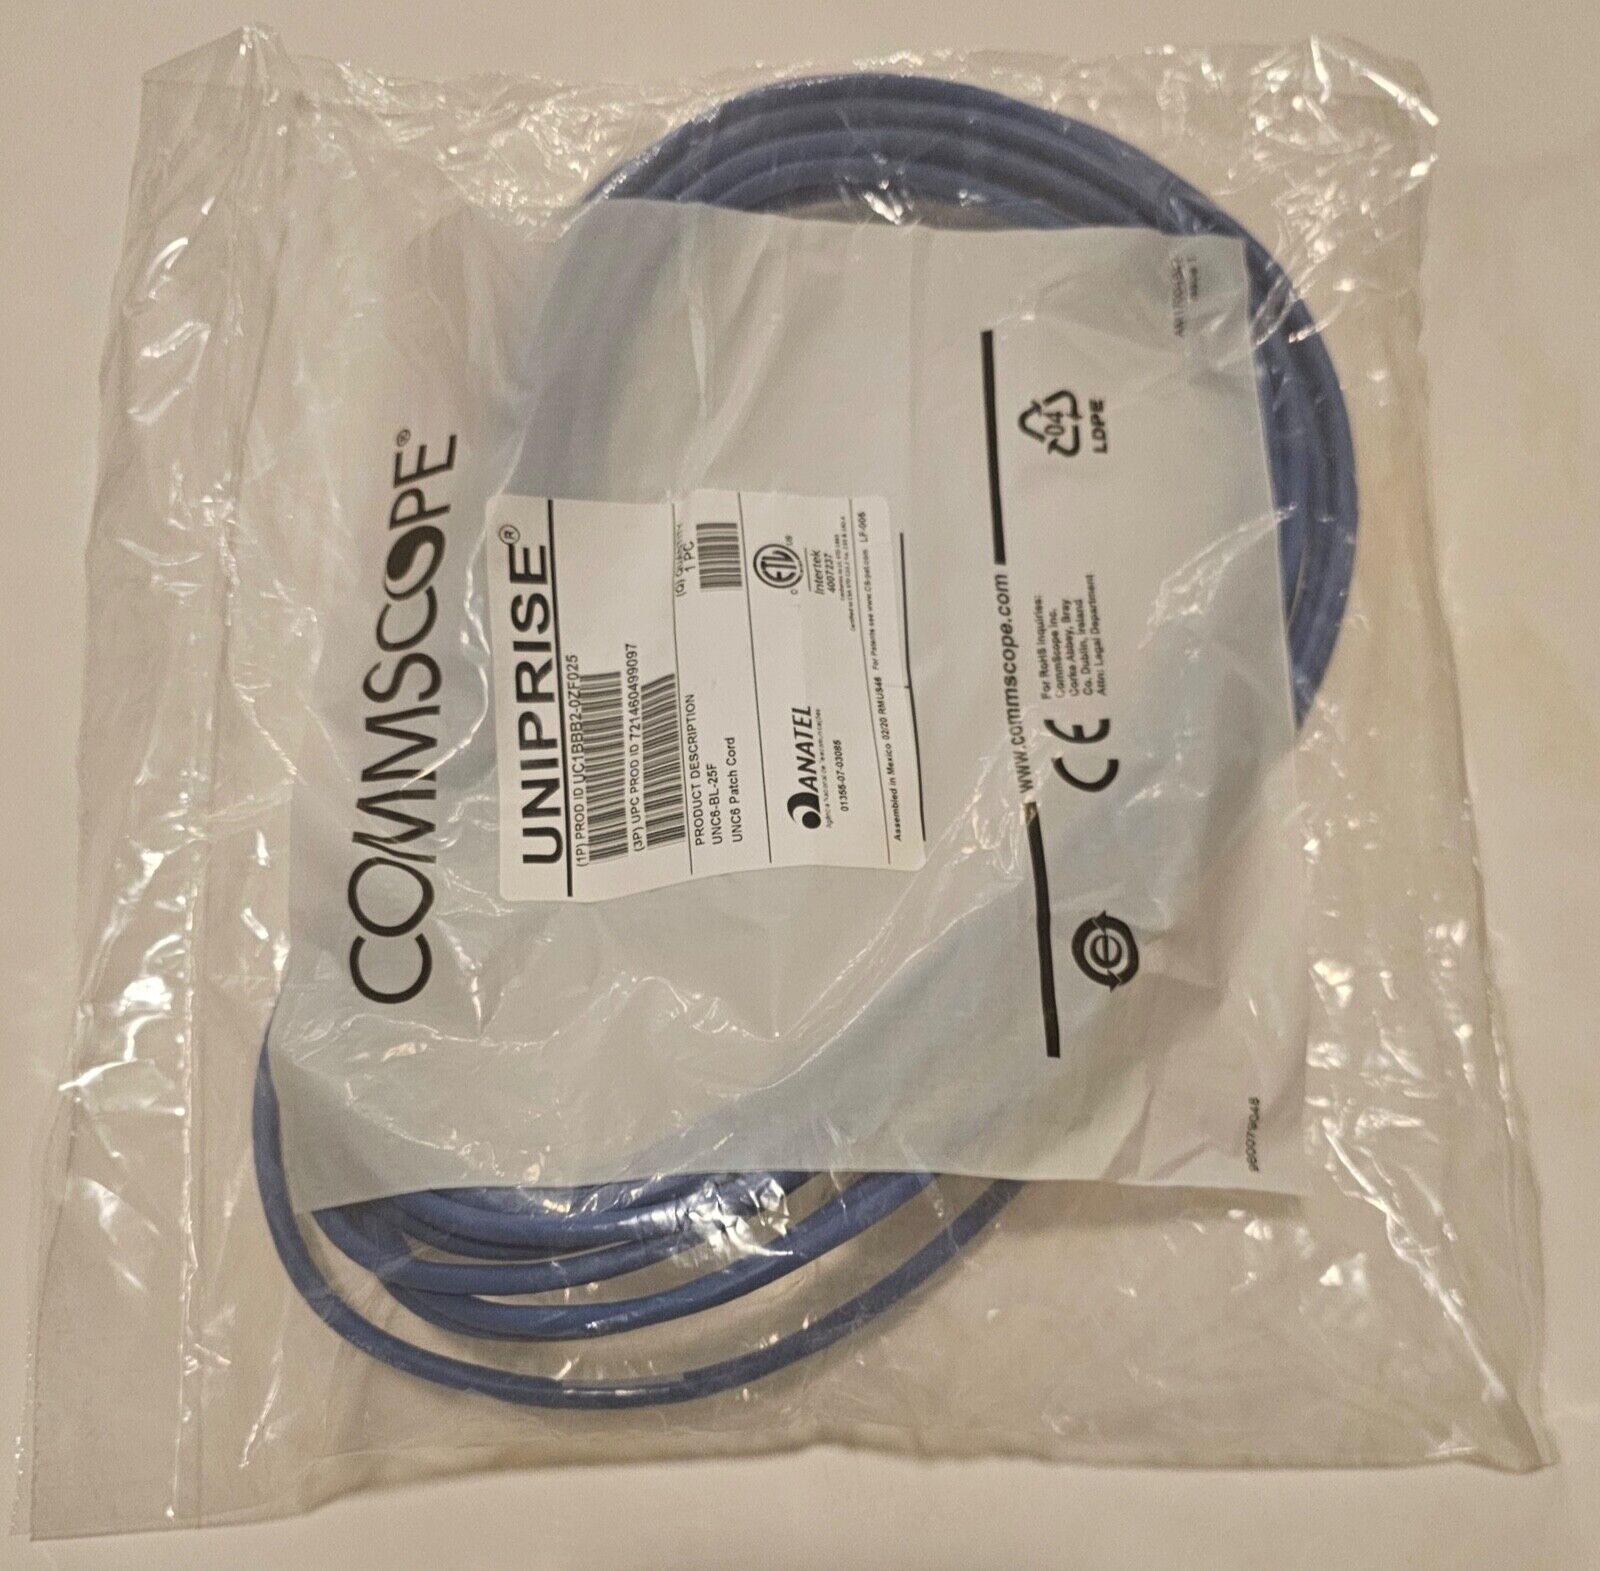 10 Pack of 25ft RJ45 CAT5e Ethernet Patch Cable - Blue - 25 Feet